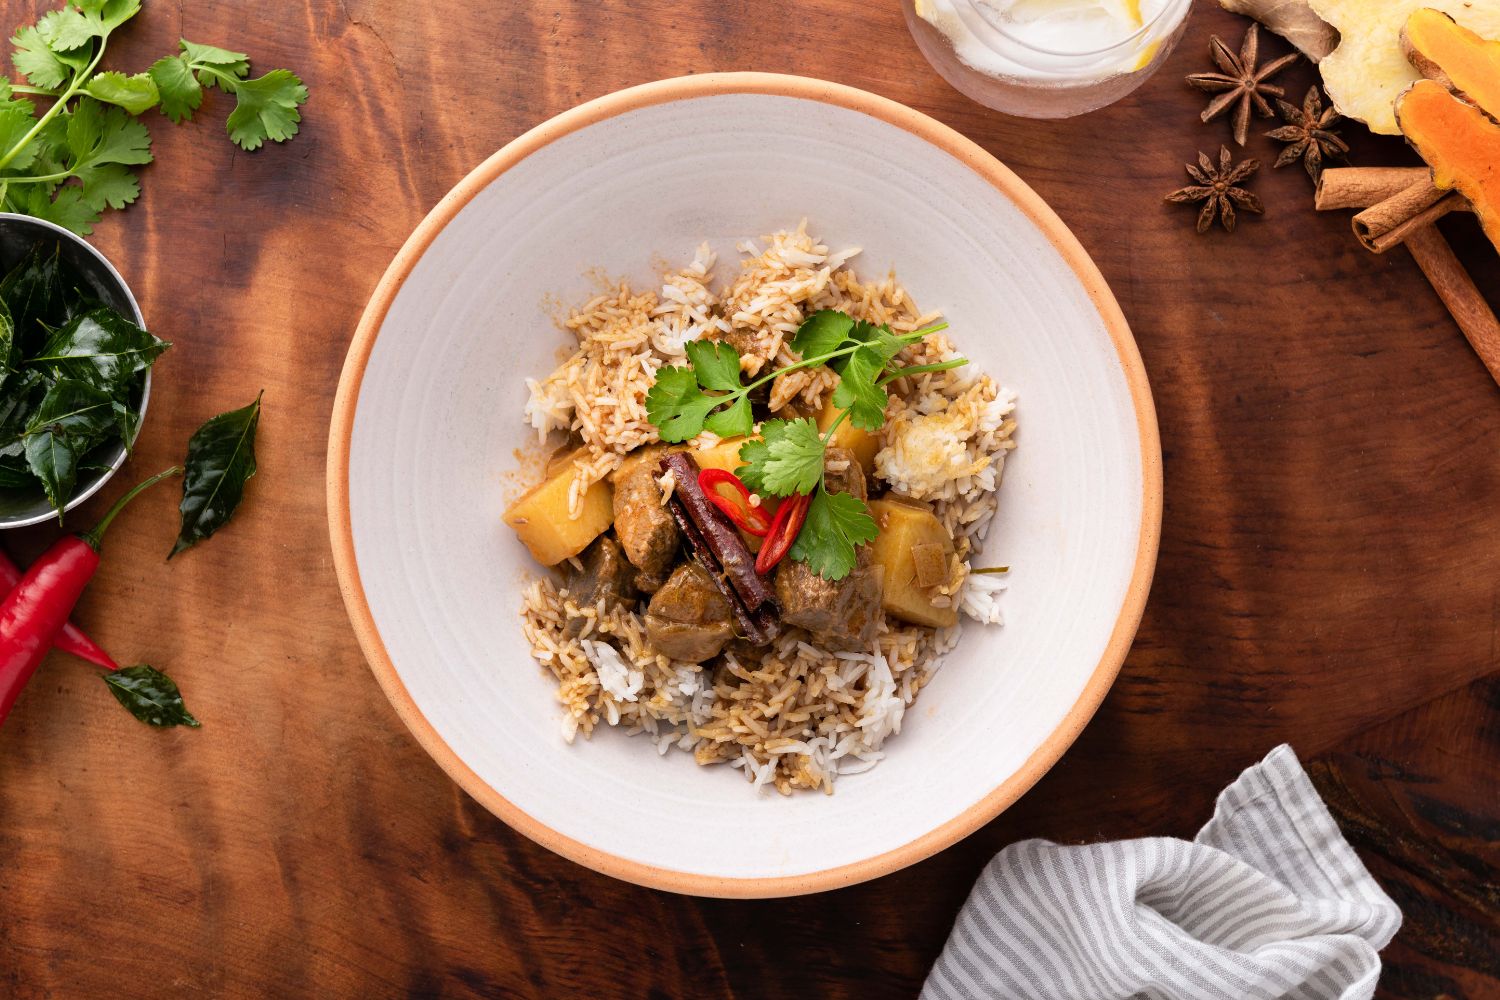 Thai massaman beef and potato curry with rice